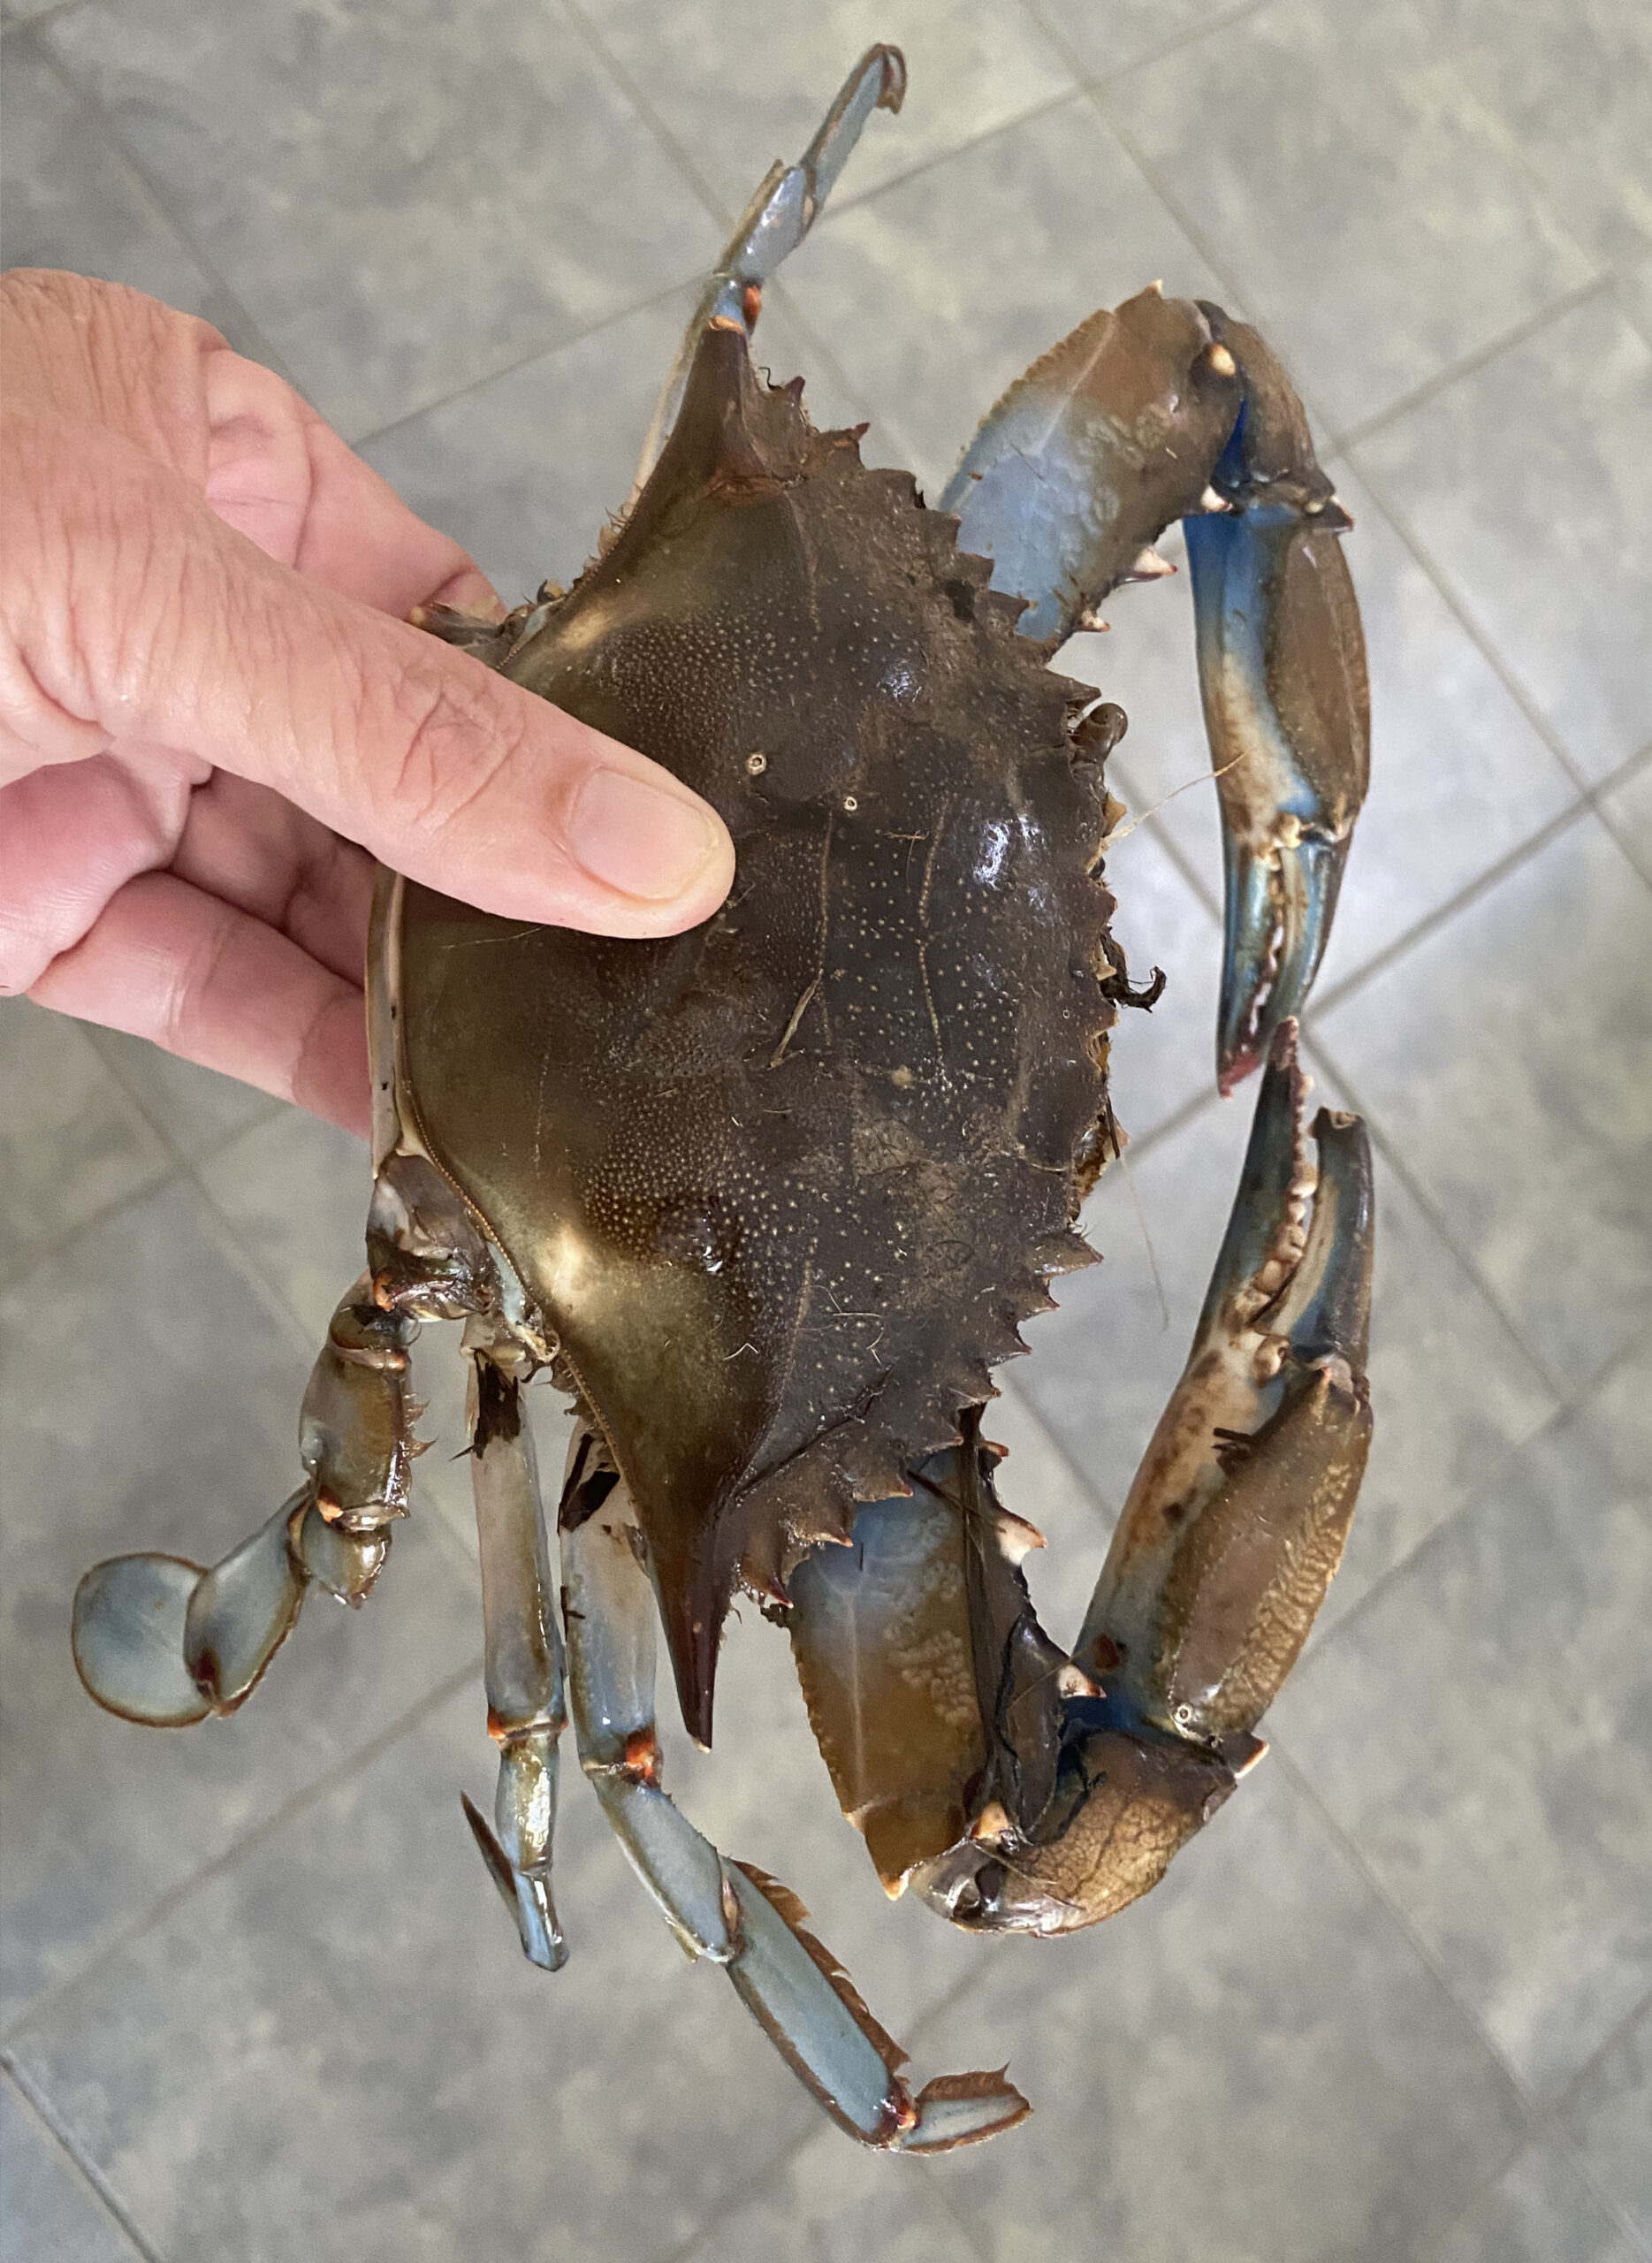 Can we talk about crab snares for a minute? (For Dungeness) I'm